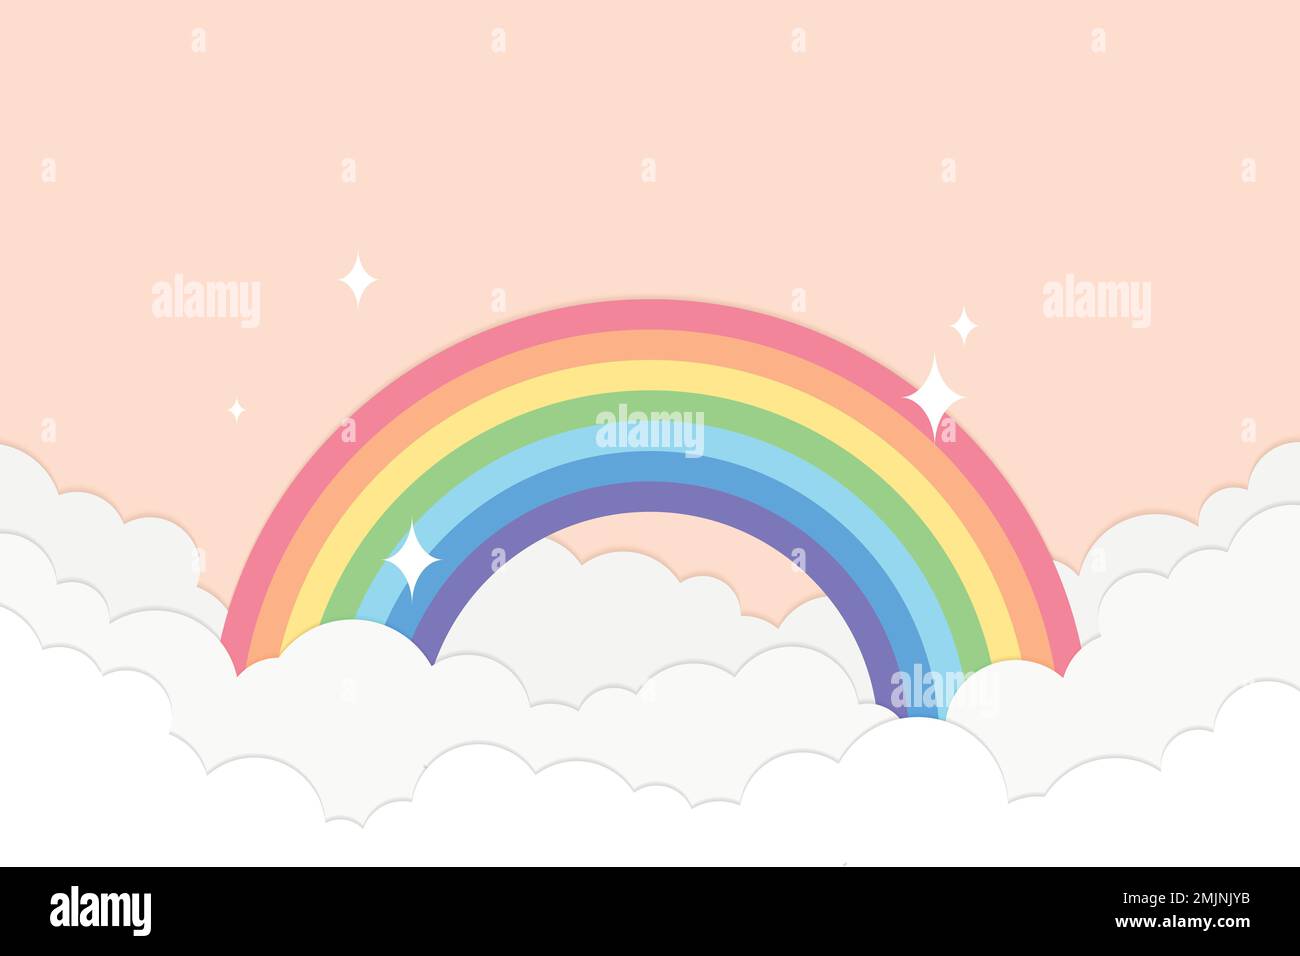 Rainbow Paper Background Stock Photo, Picture and Royalty Free Image. Image  30795656.